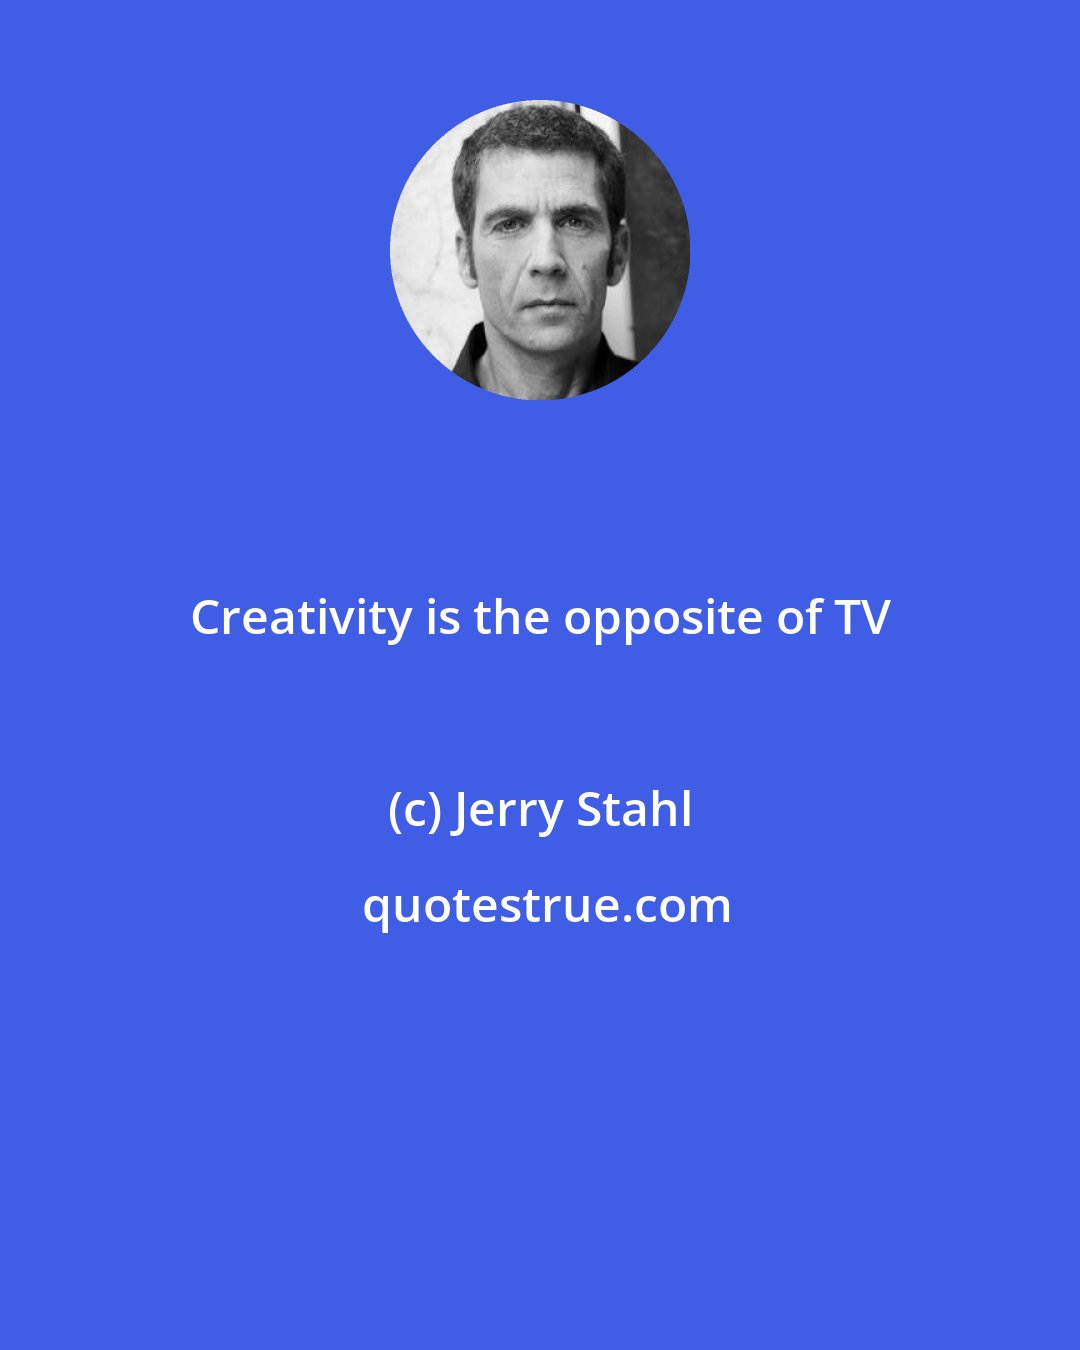 Jerry Stahl: Creativity is the opposite of TV